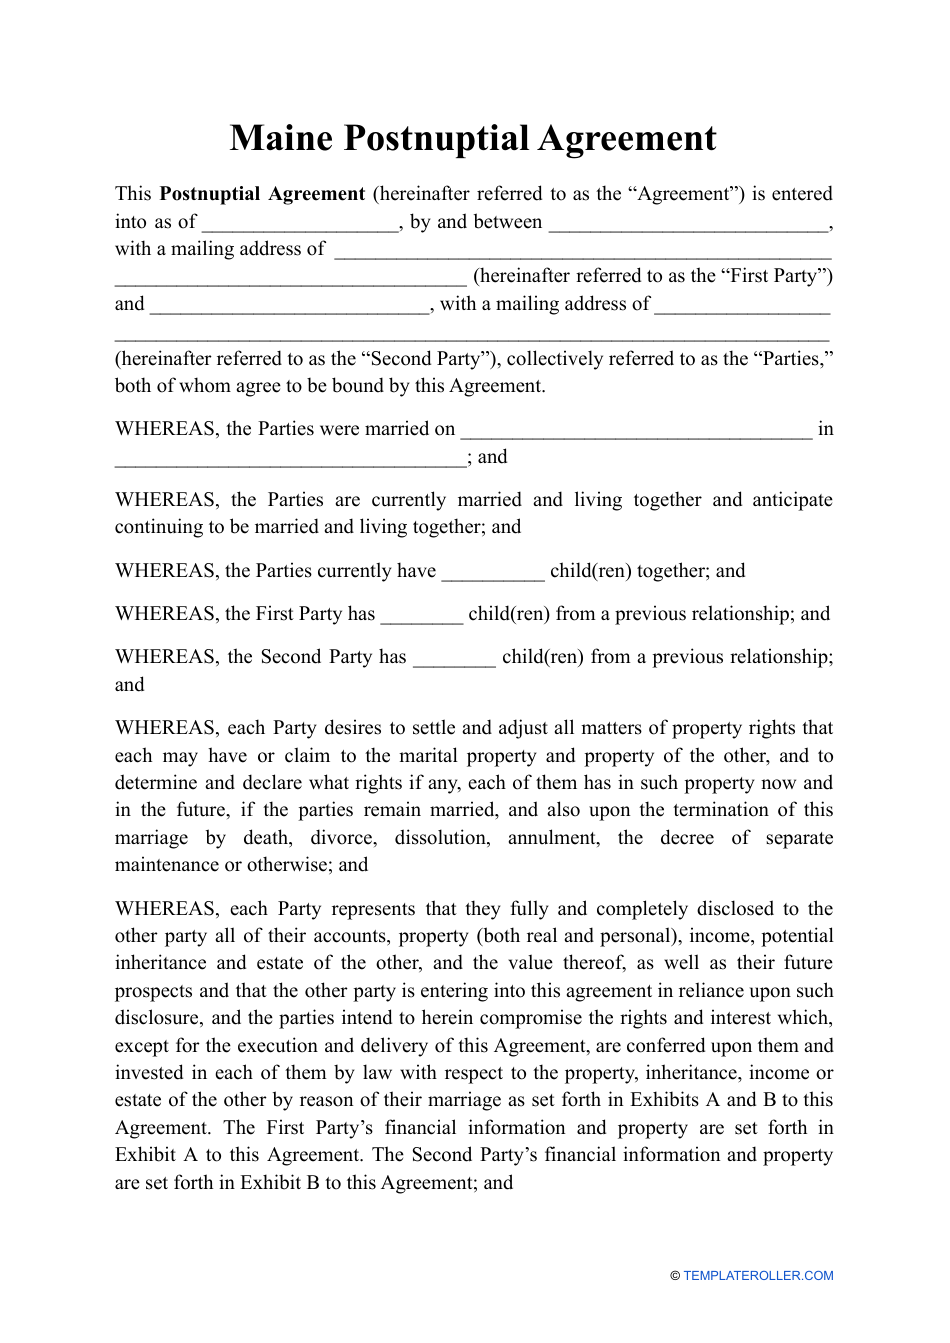 maine-postnuptial-agreement-template-download-printable-pdf